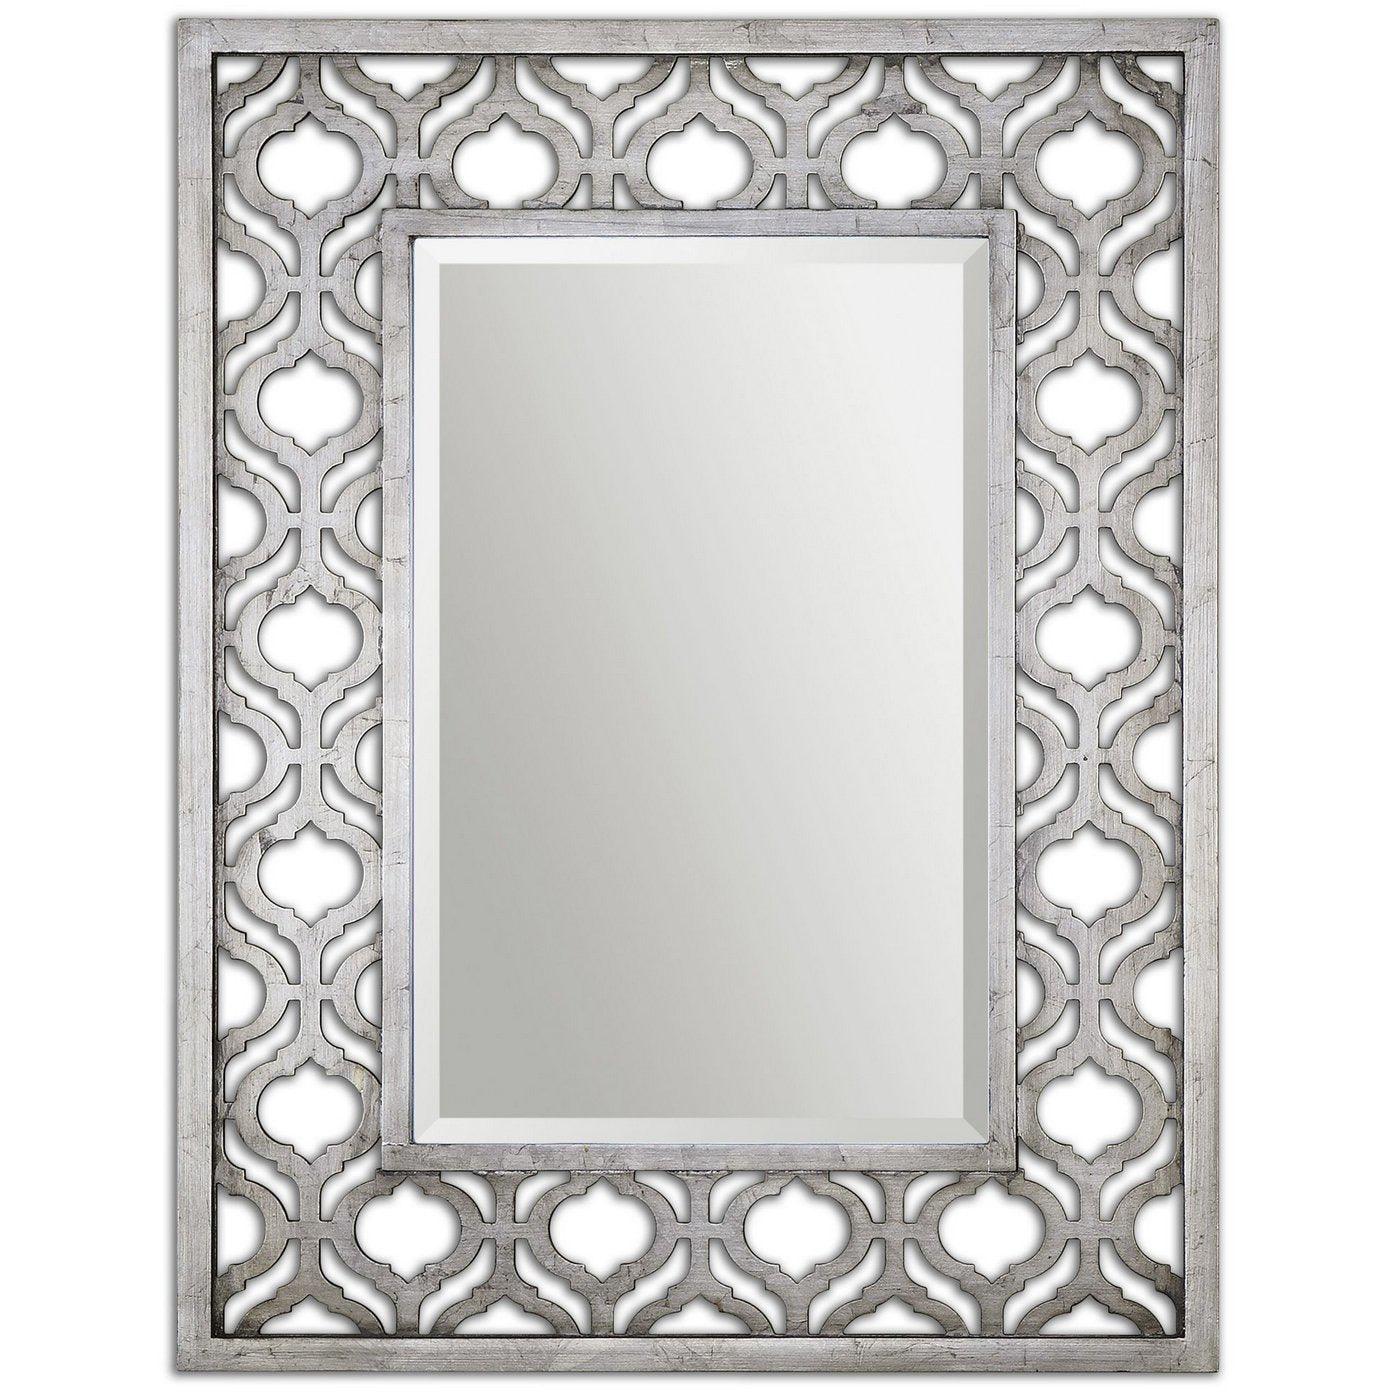 The Uttermost - Sorbolo Mirror - 13863 | Montreal Lighting & Hardware